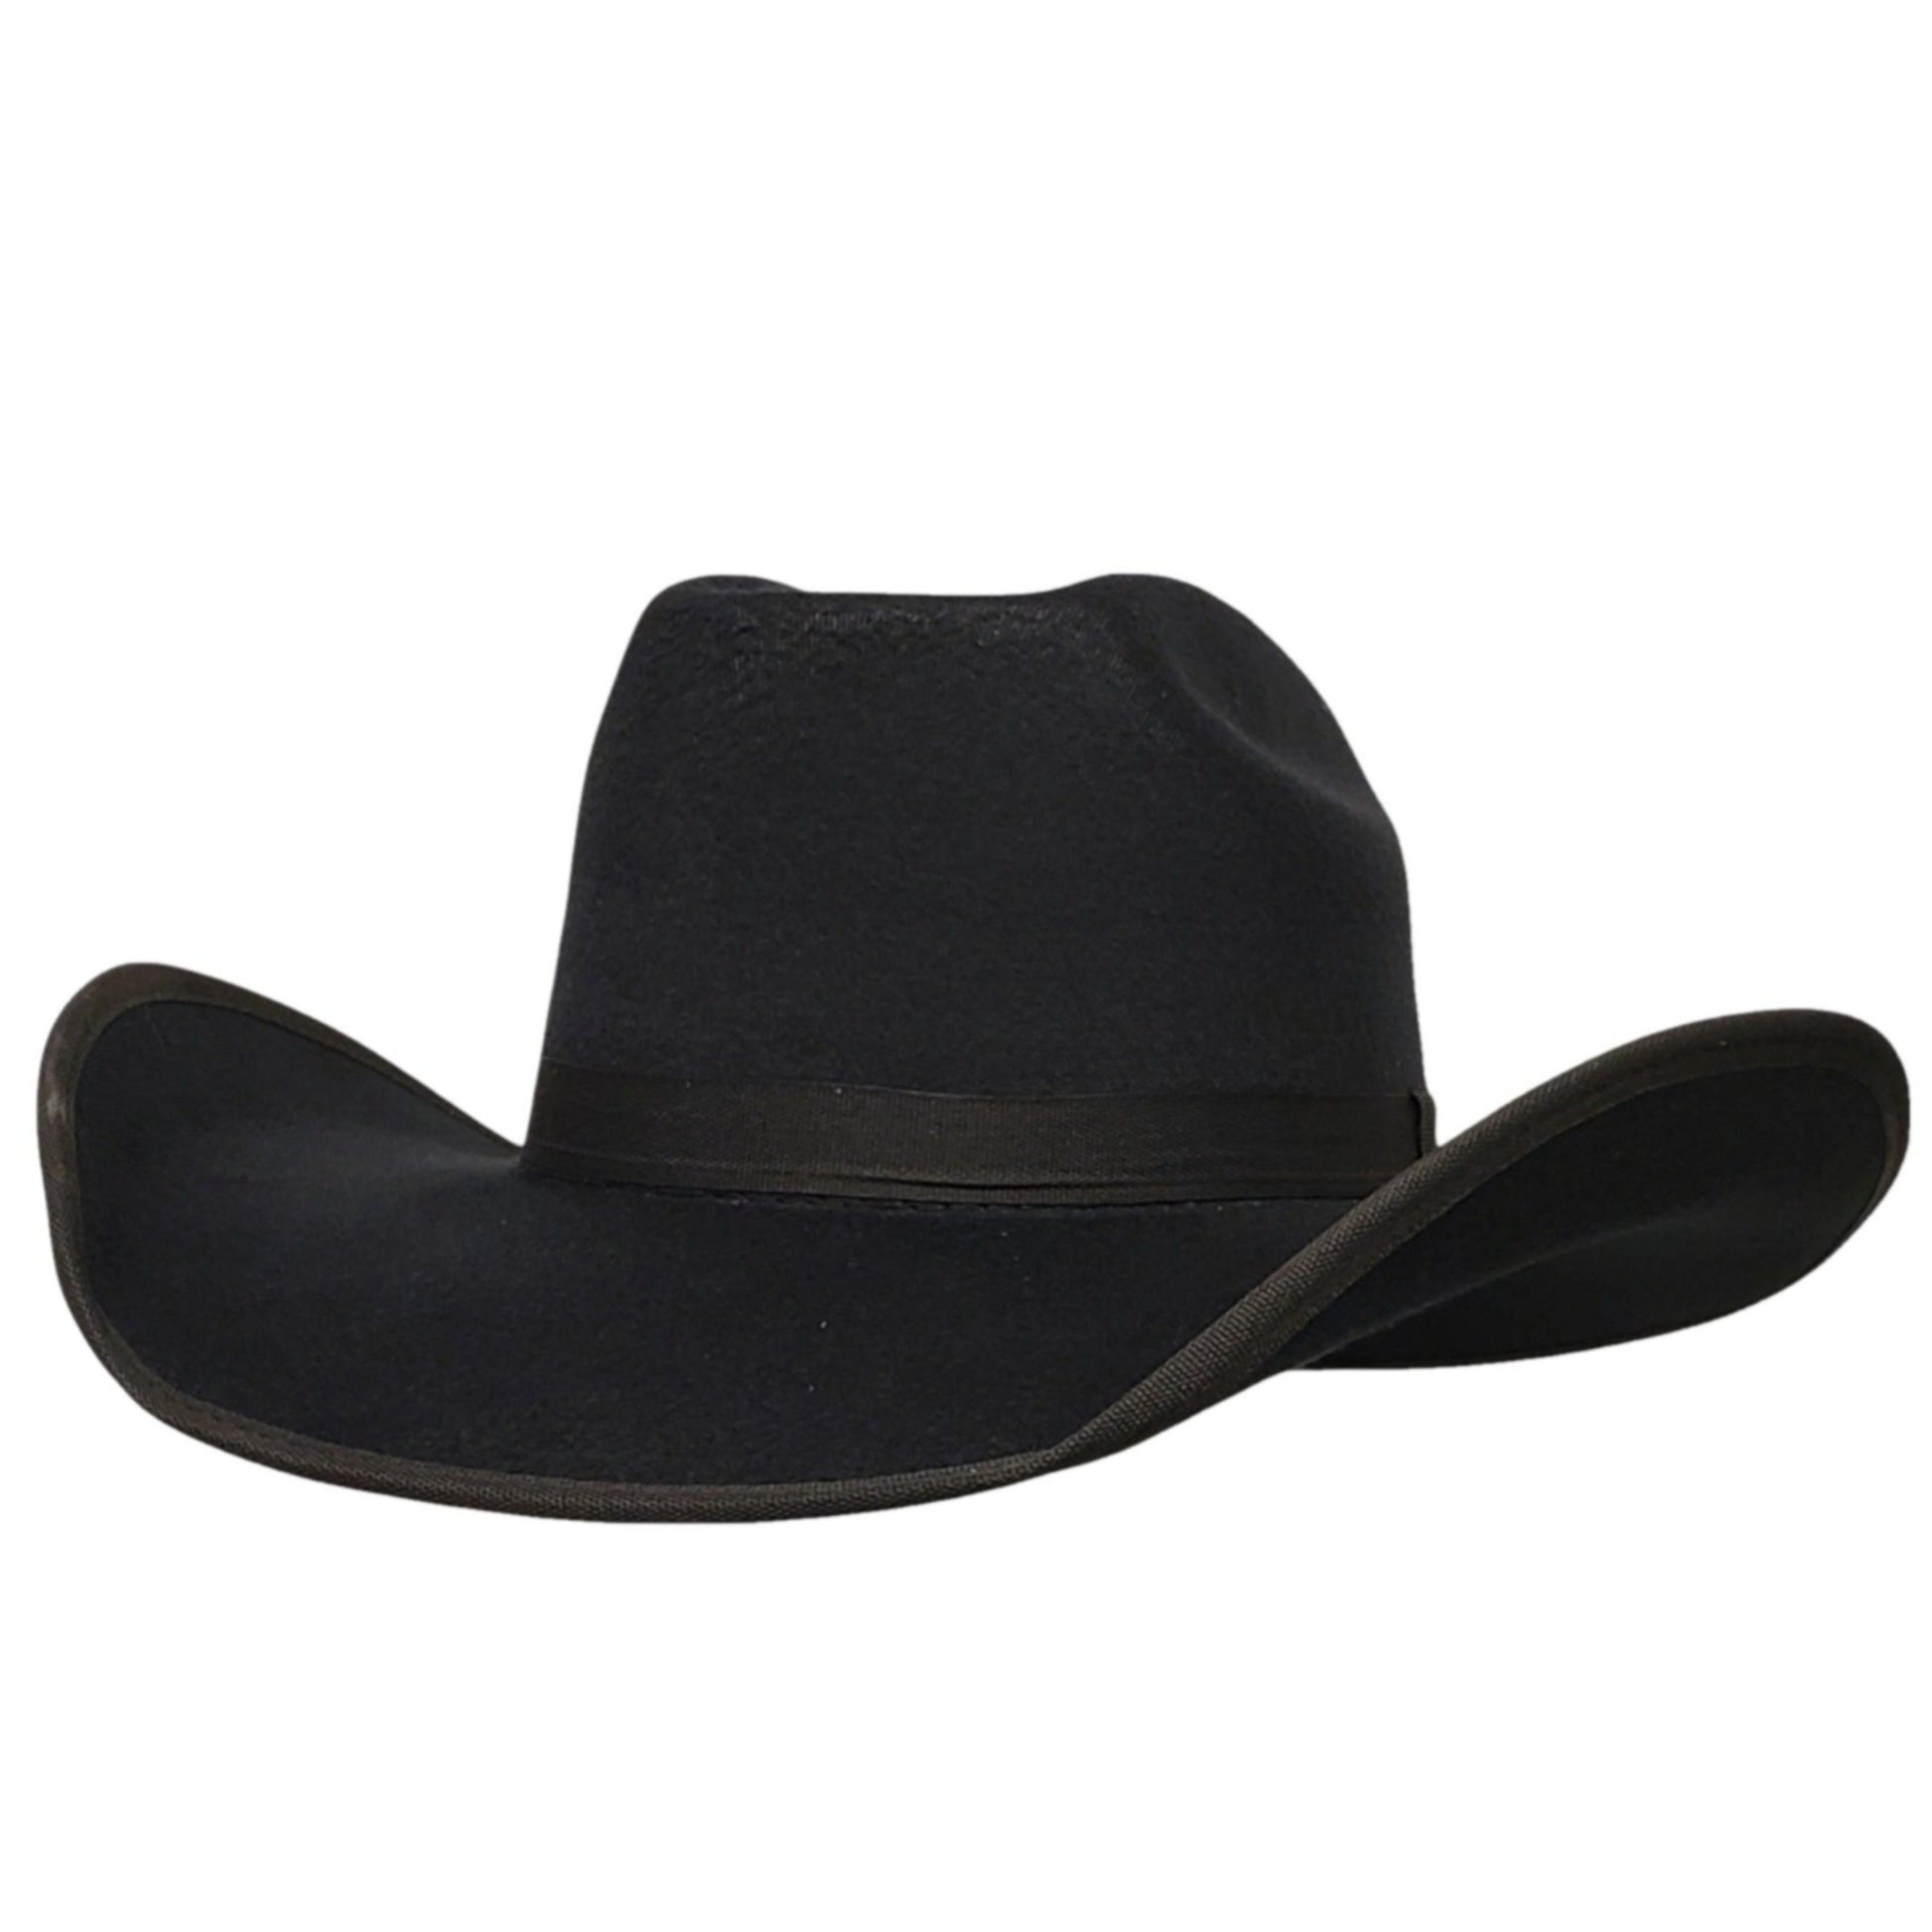 Freehand Black Felt Cowboy Hat - Cody Series Small Fits 6-7/8 to 7